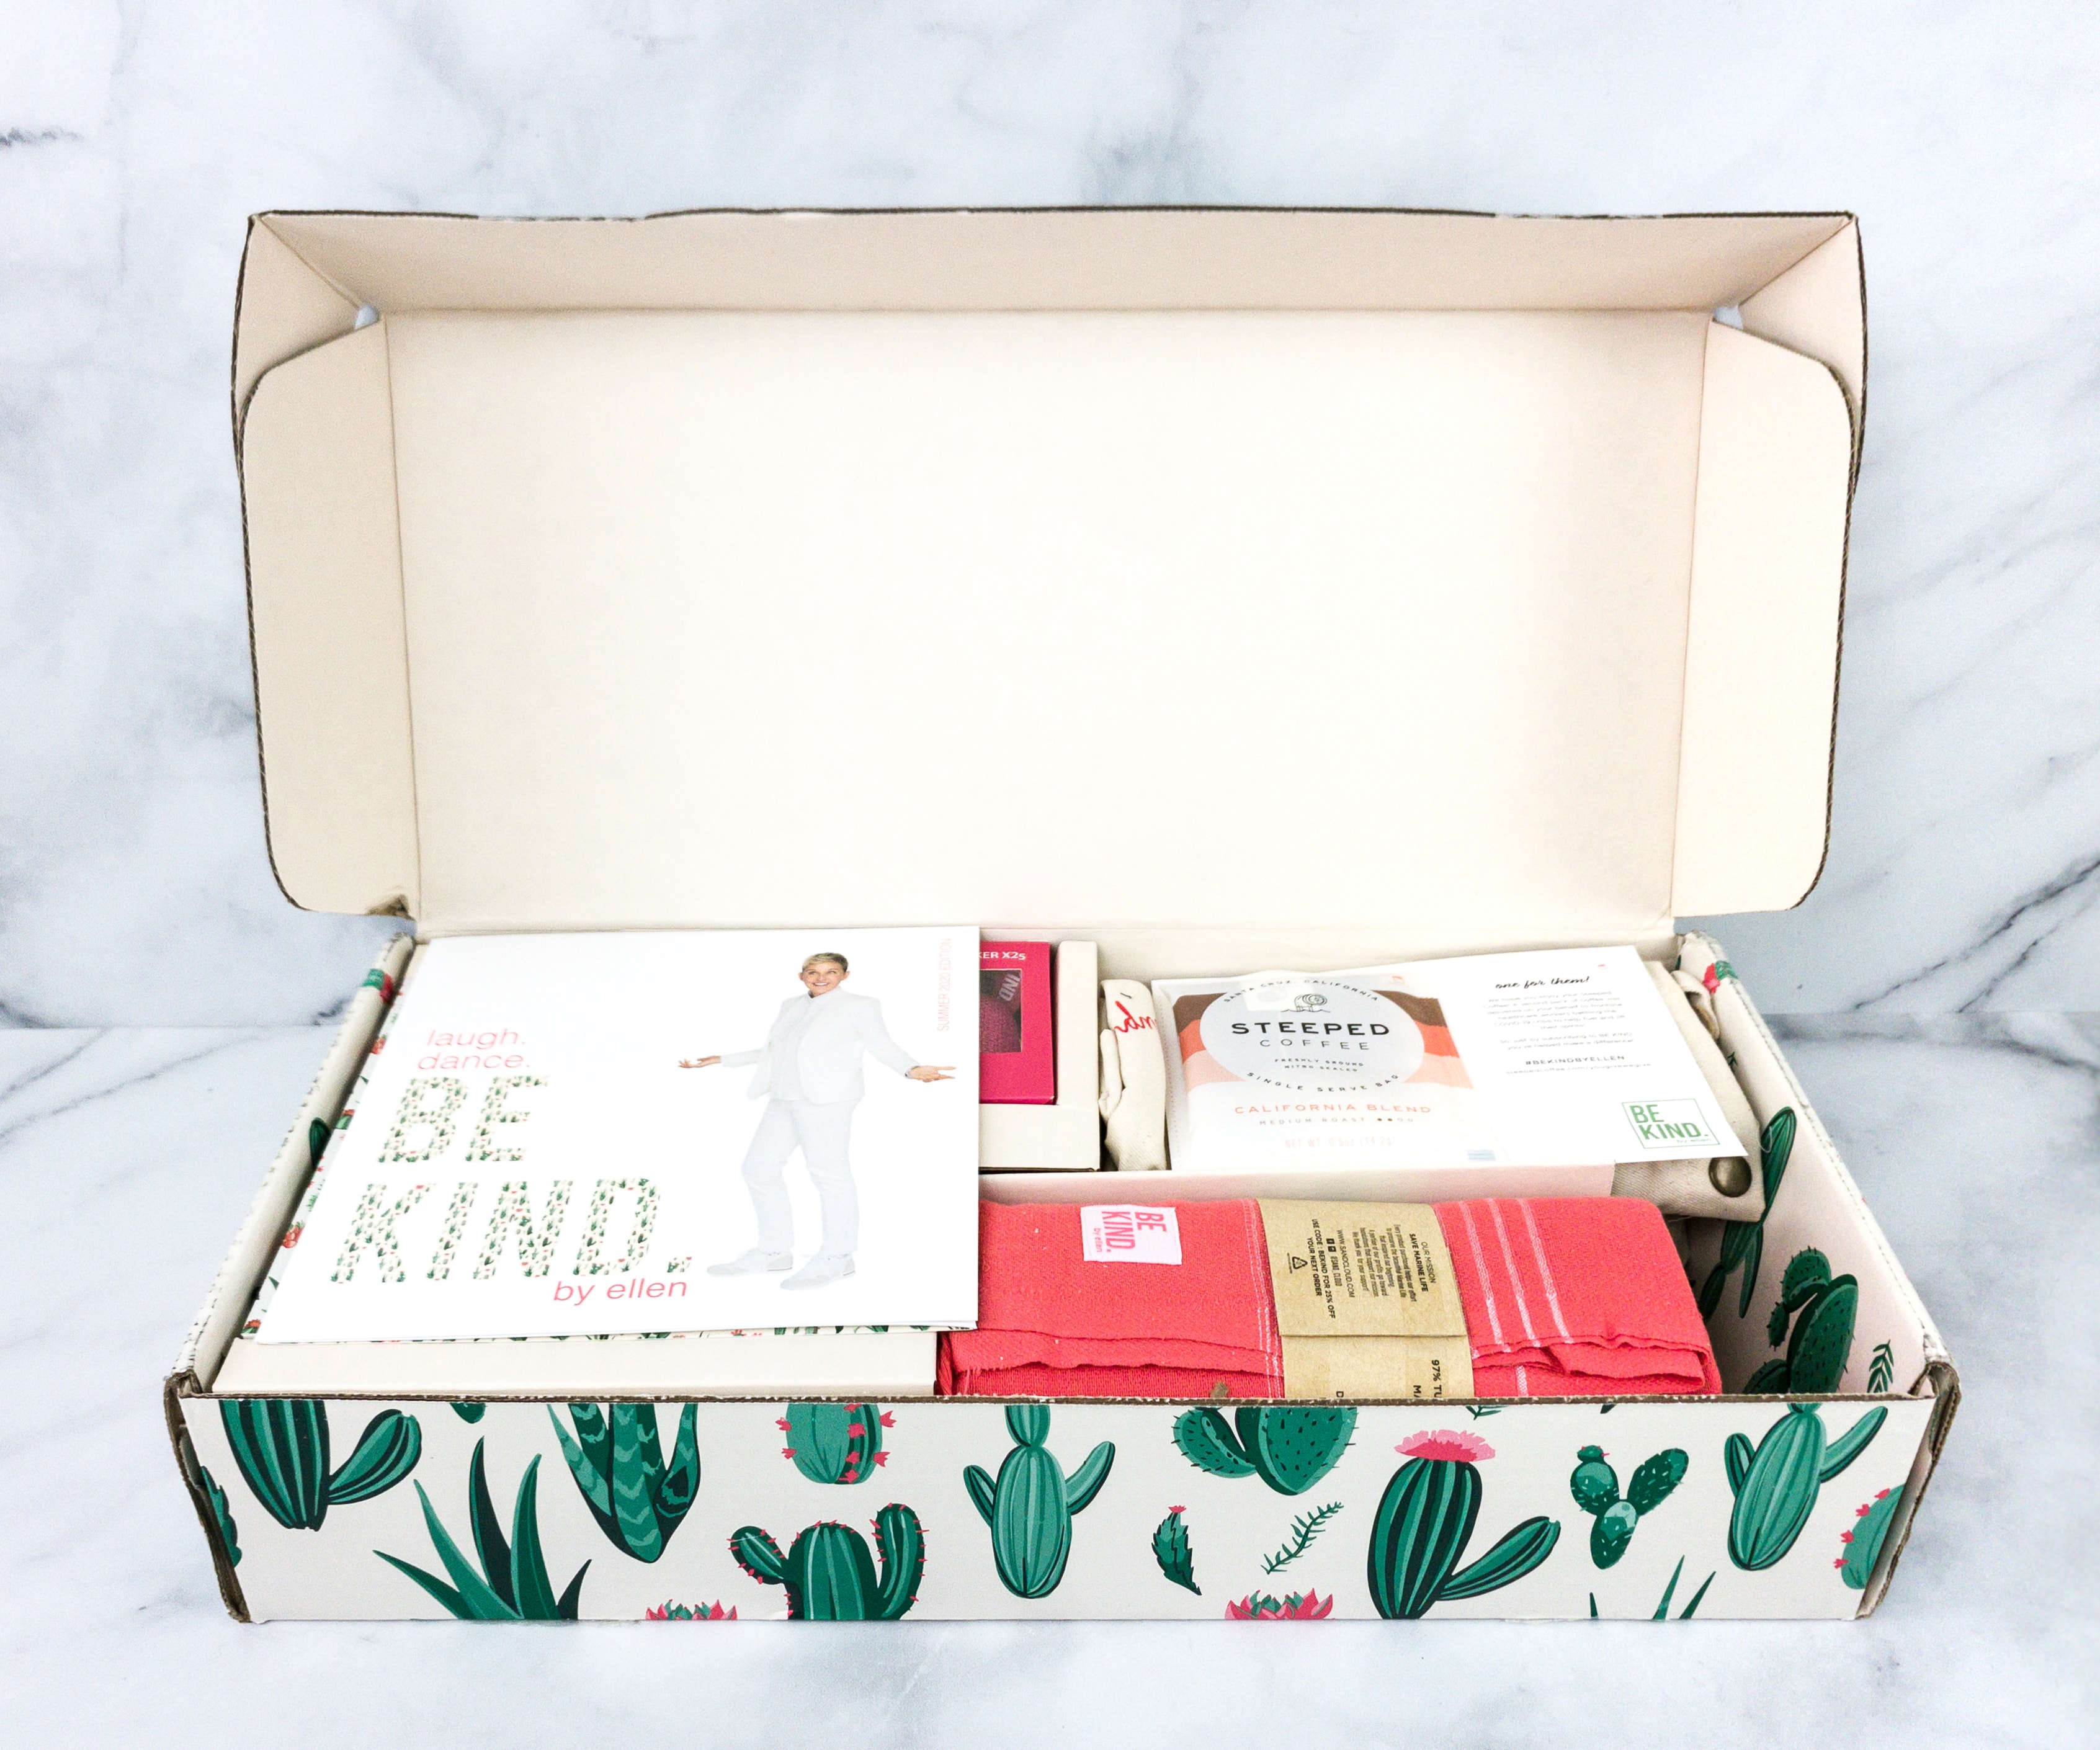 BE KIND by Ellen Summer 2020 Subscription Box Review hello subscription